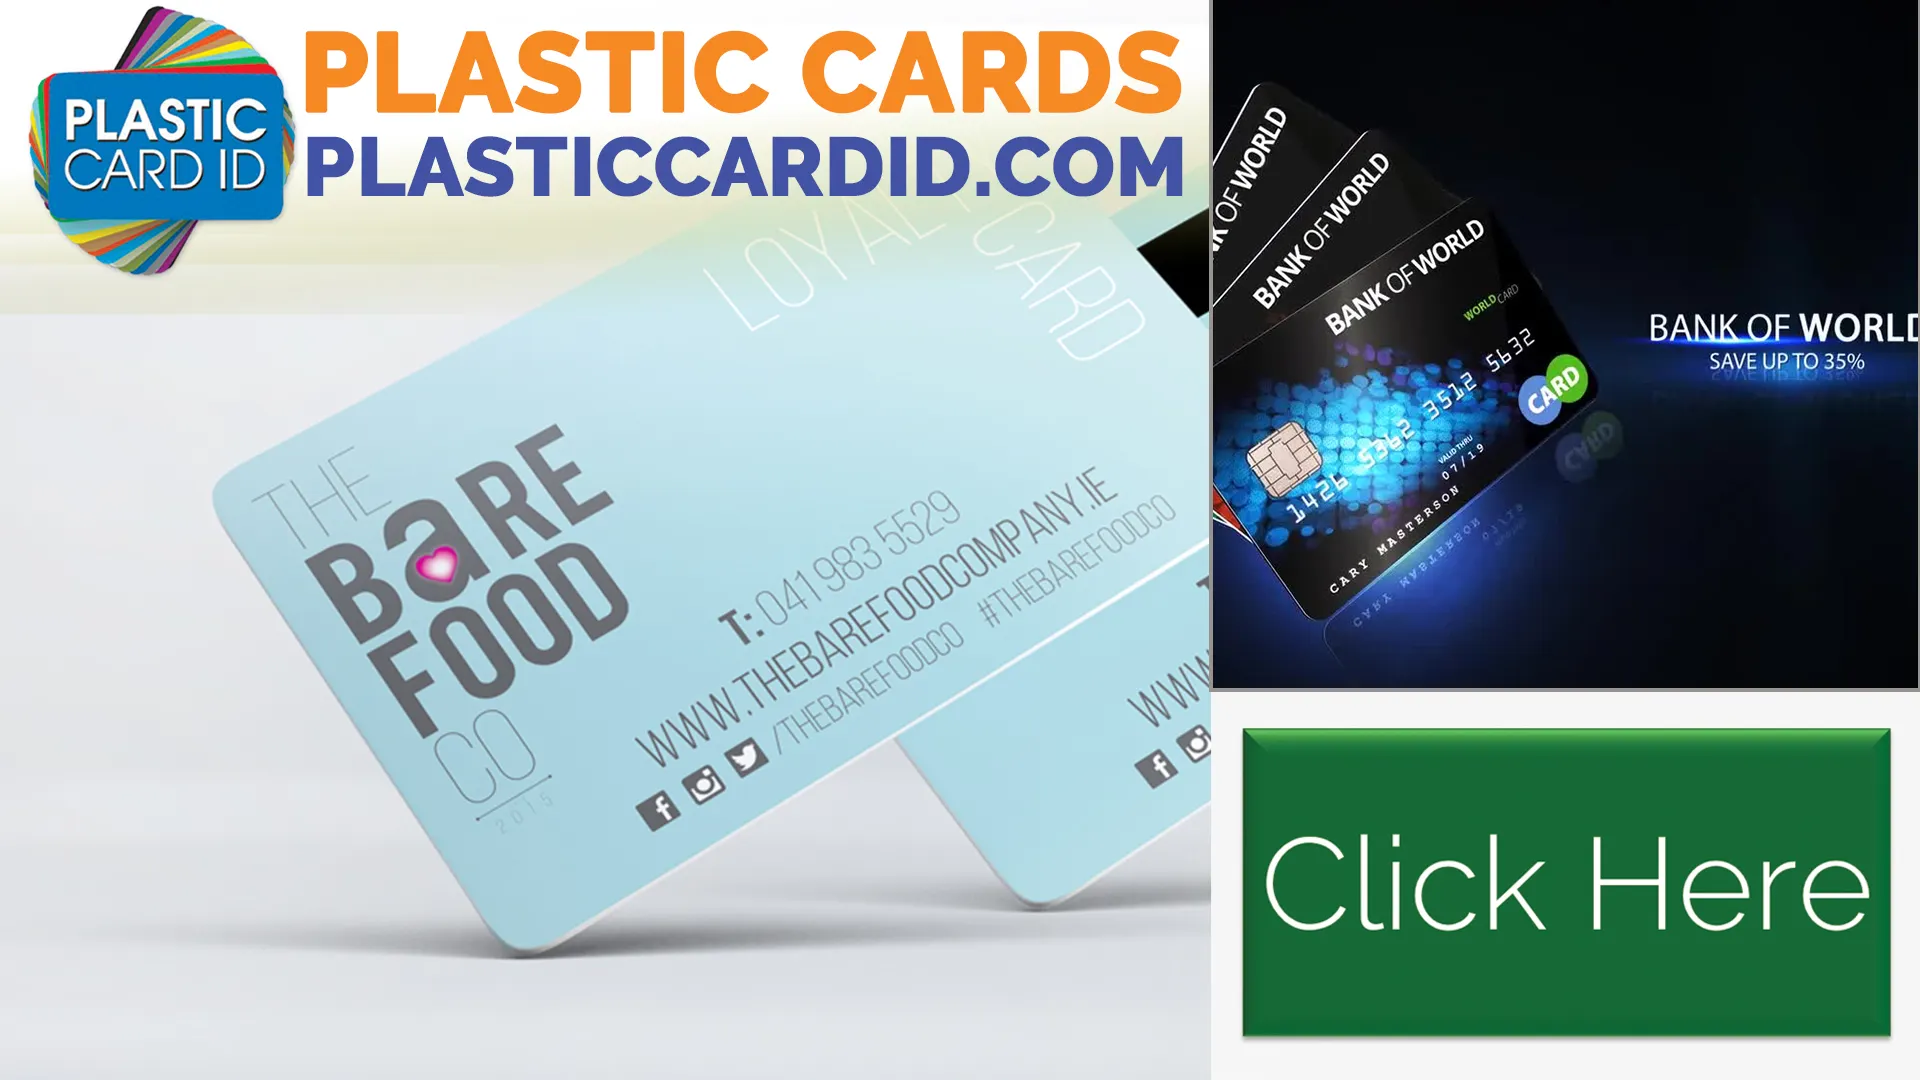 Practical Insights for Daily Handling of Your Plastic Cards